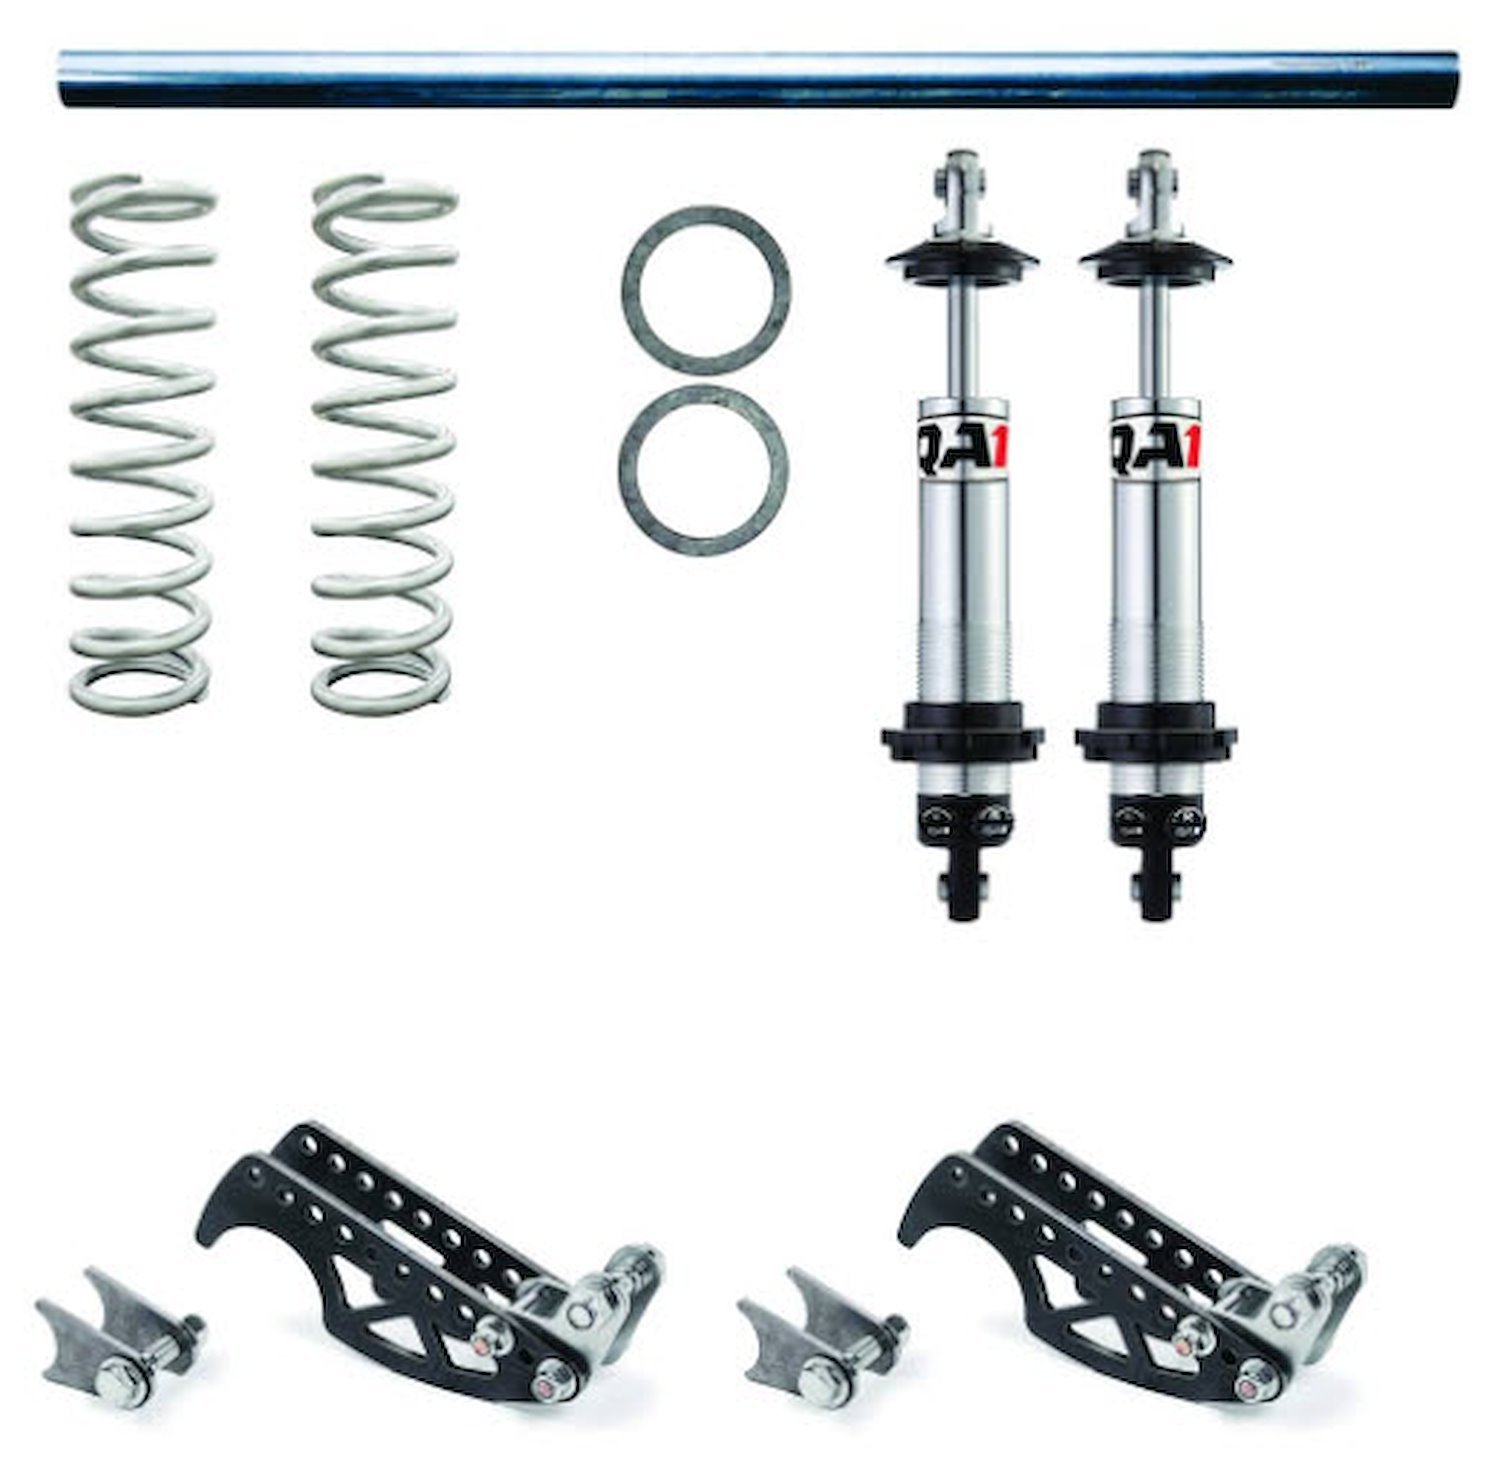 DD501-2001 Heavy-Duty Pro Rear Coil-Over Conversion System for 3 1/4 in. Axle Tubes w/Double-Adjustable Shocks & 200 lb. Springs